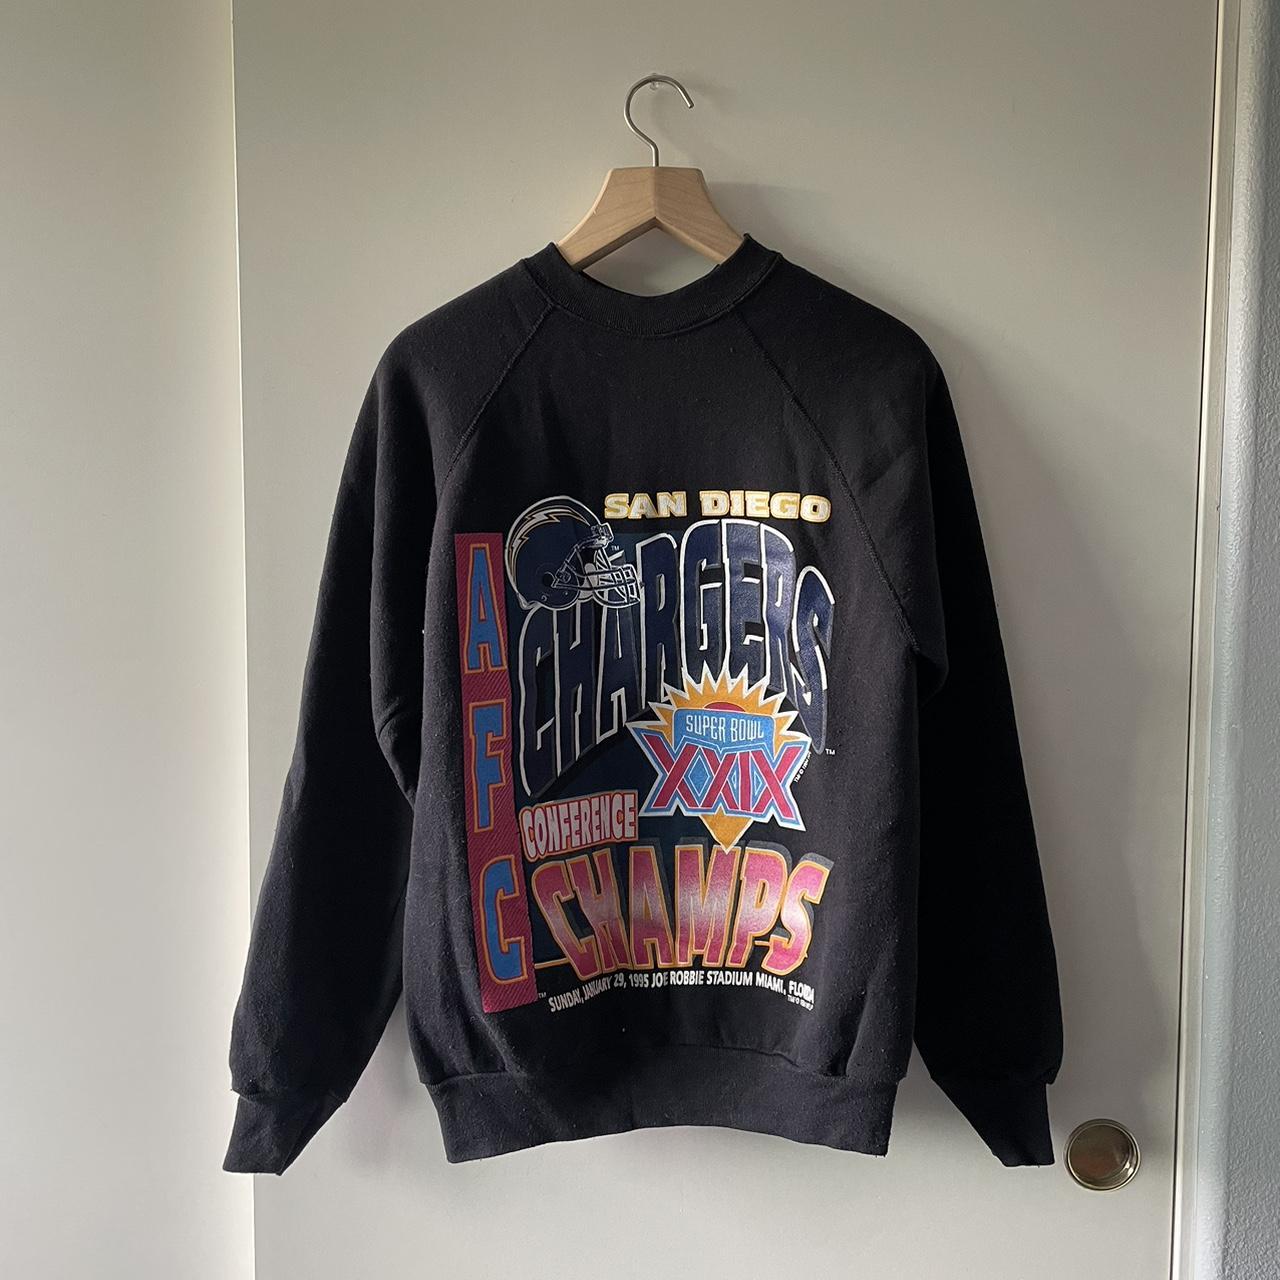 Made in USA Super Bowl XXIX Chargers Sweater,... - Depop